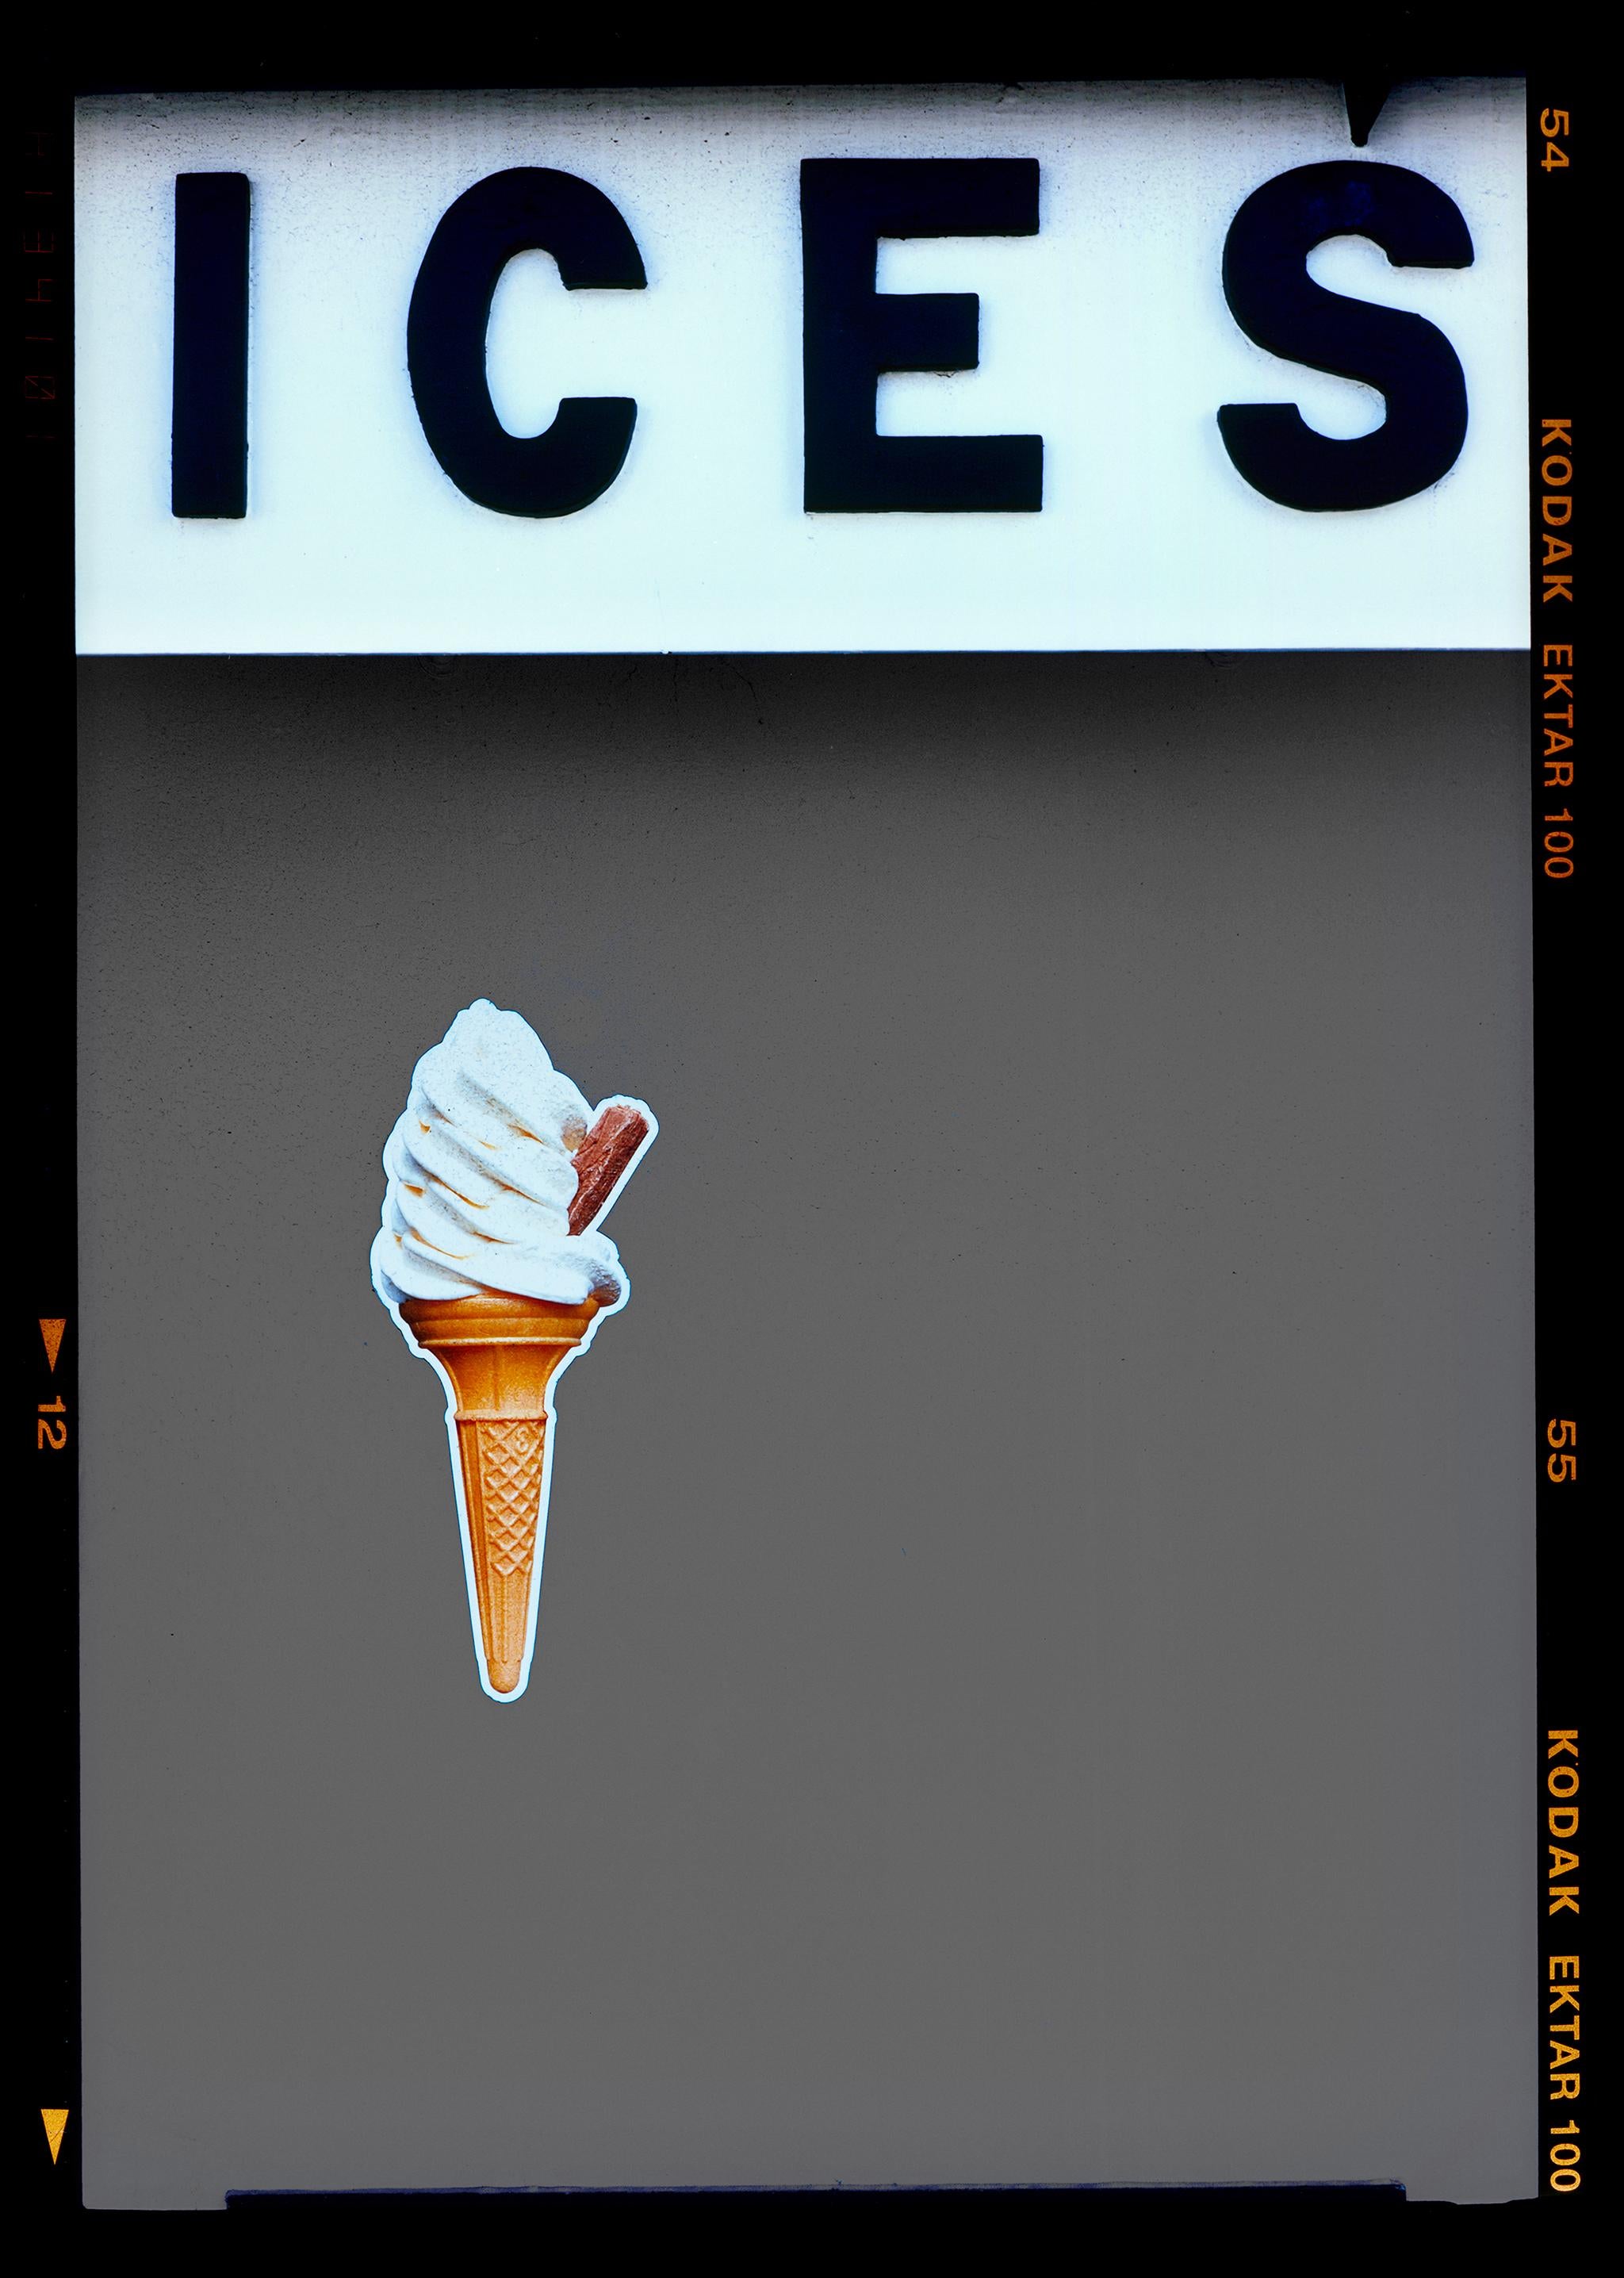 Richard Heeps Color Photograph - Ices (Grey), Bexhill-on-Sea - British seaside color photography